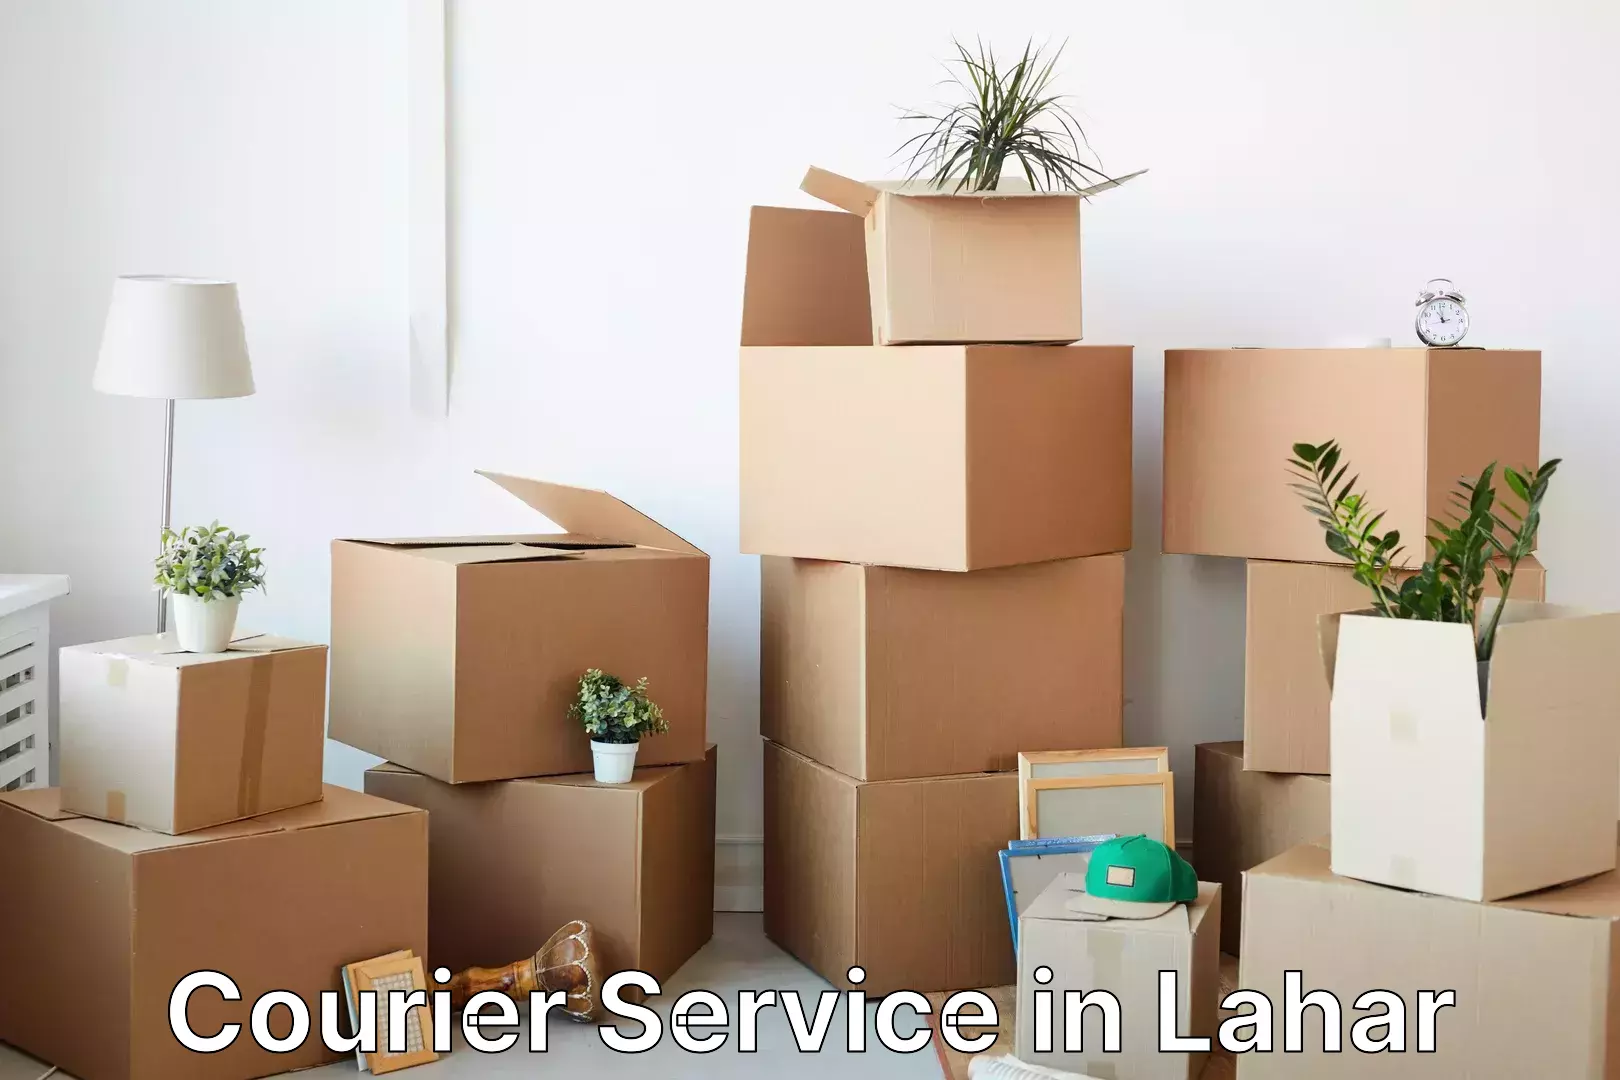 Enhanced delivery experience in Lahar